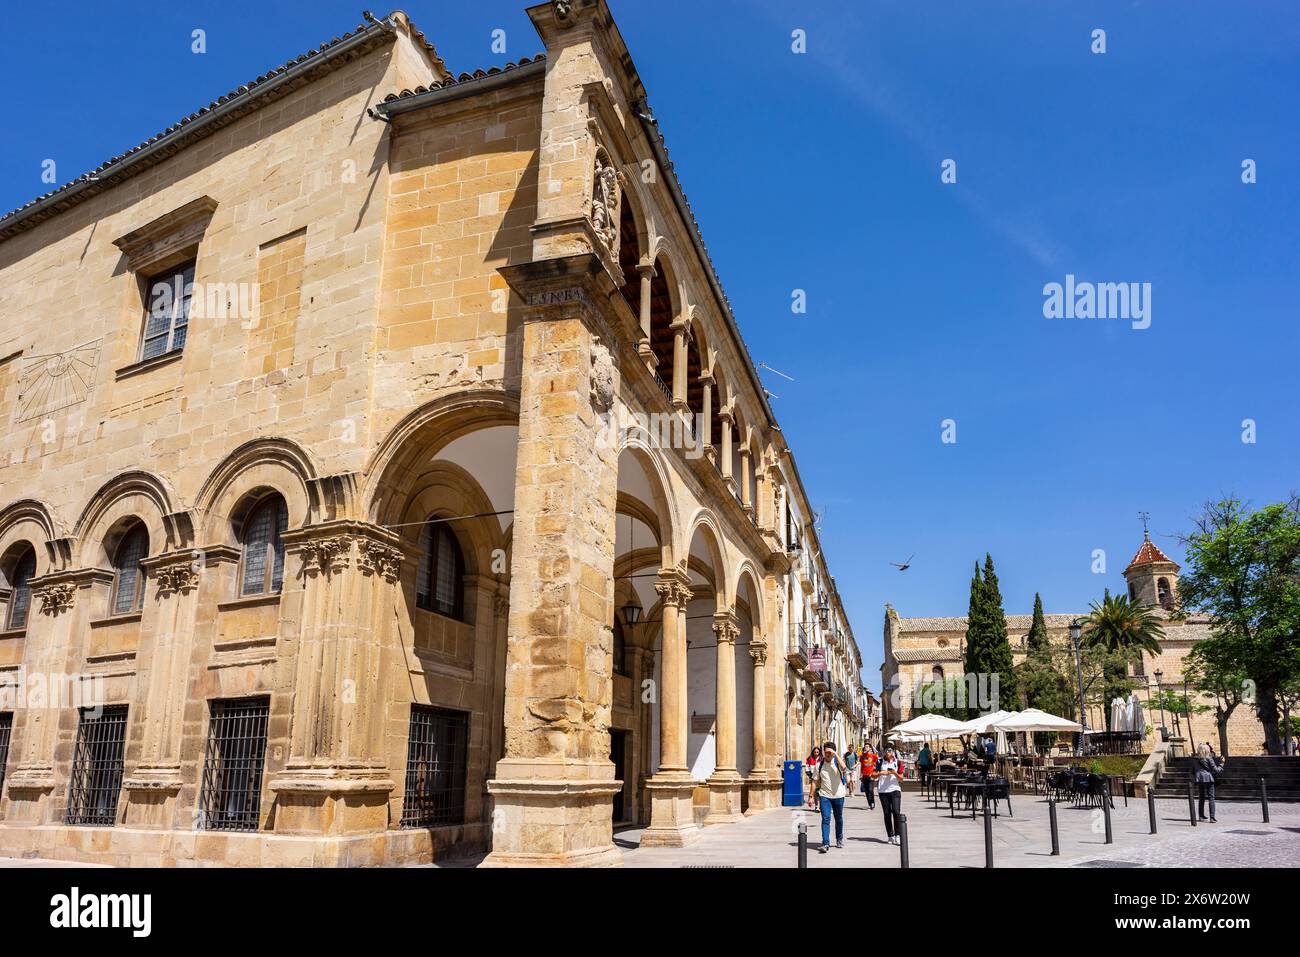 Old Town Halls - also called Council Palace or Old Town Hall, Úbeda, Jaén province, Andalusia, Spain. Stock Photo